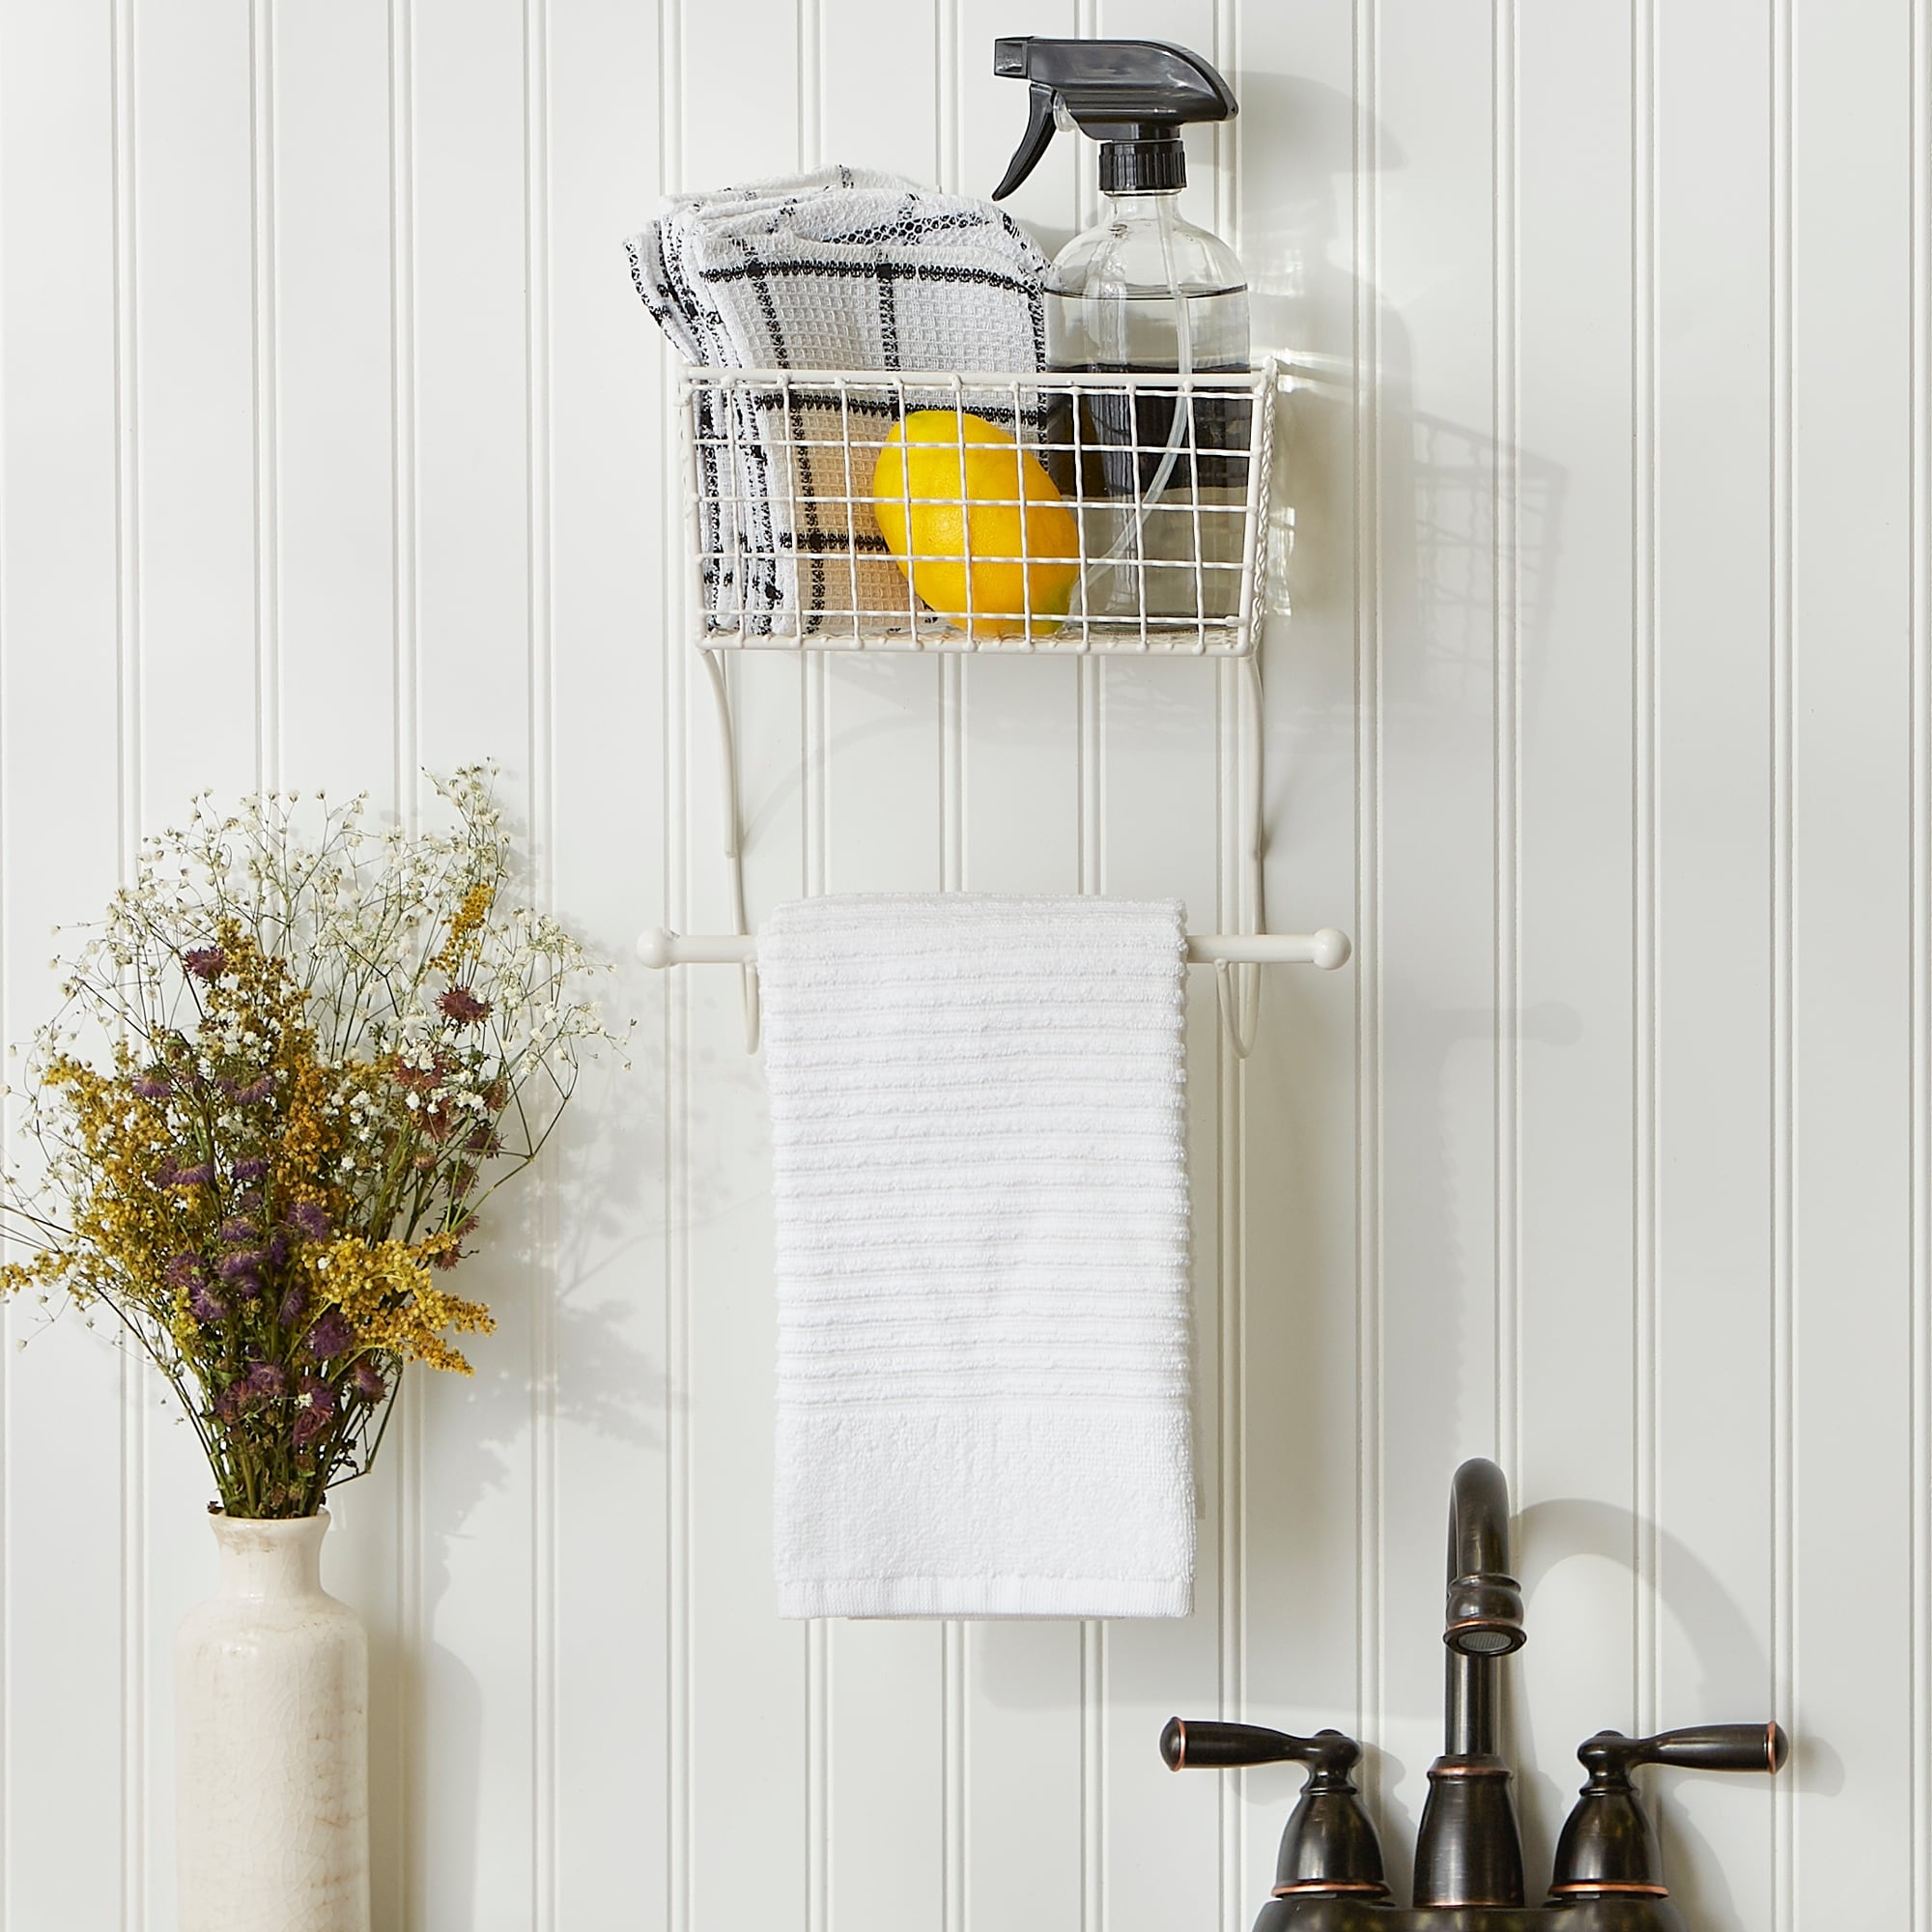 https://ak1.ostkcdn.com/images/products/is/images/direct/8401688df836707bcc91338d225fcf148fe7f2e4/DII-Farmhouse-Towel-Rack.jpg